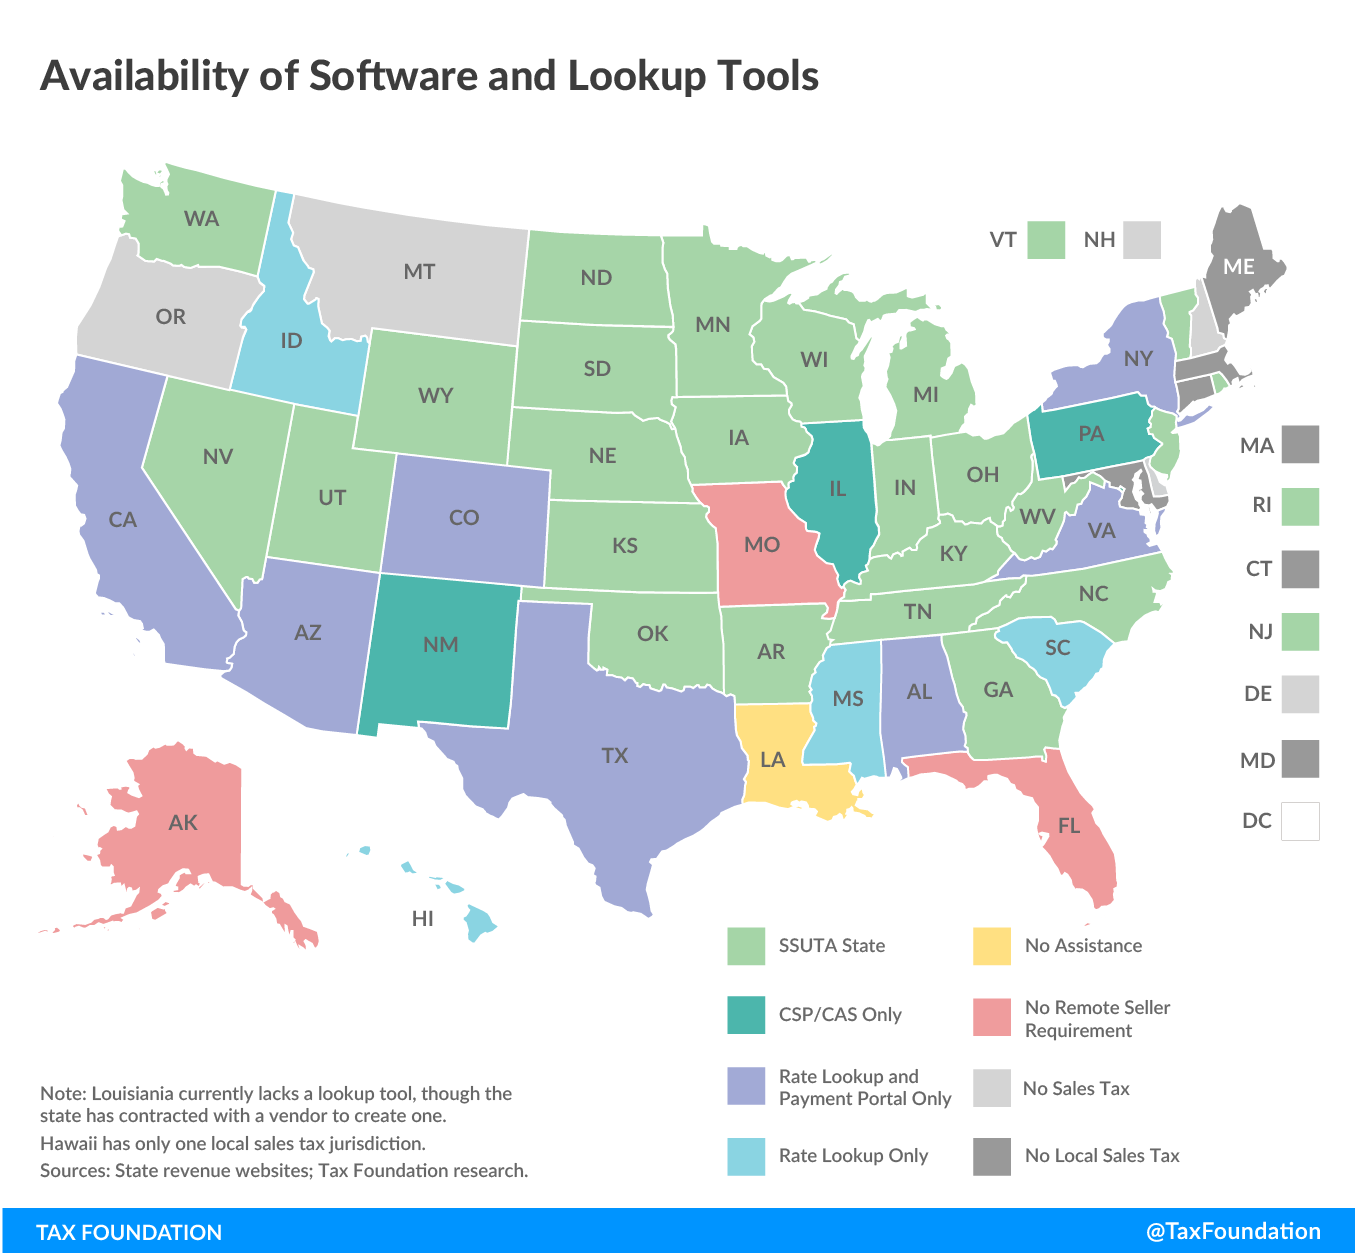 Availability of online sales tax collection software and lookup tools